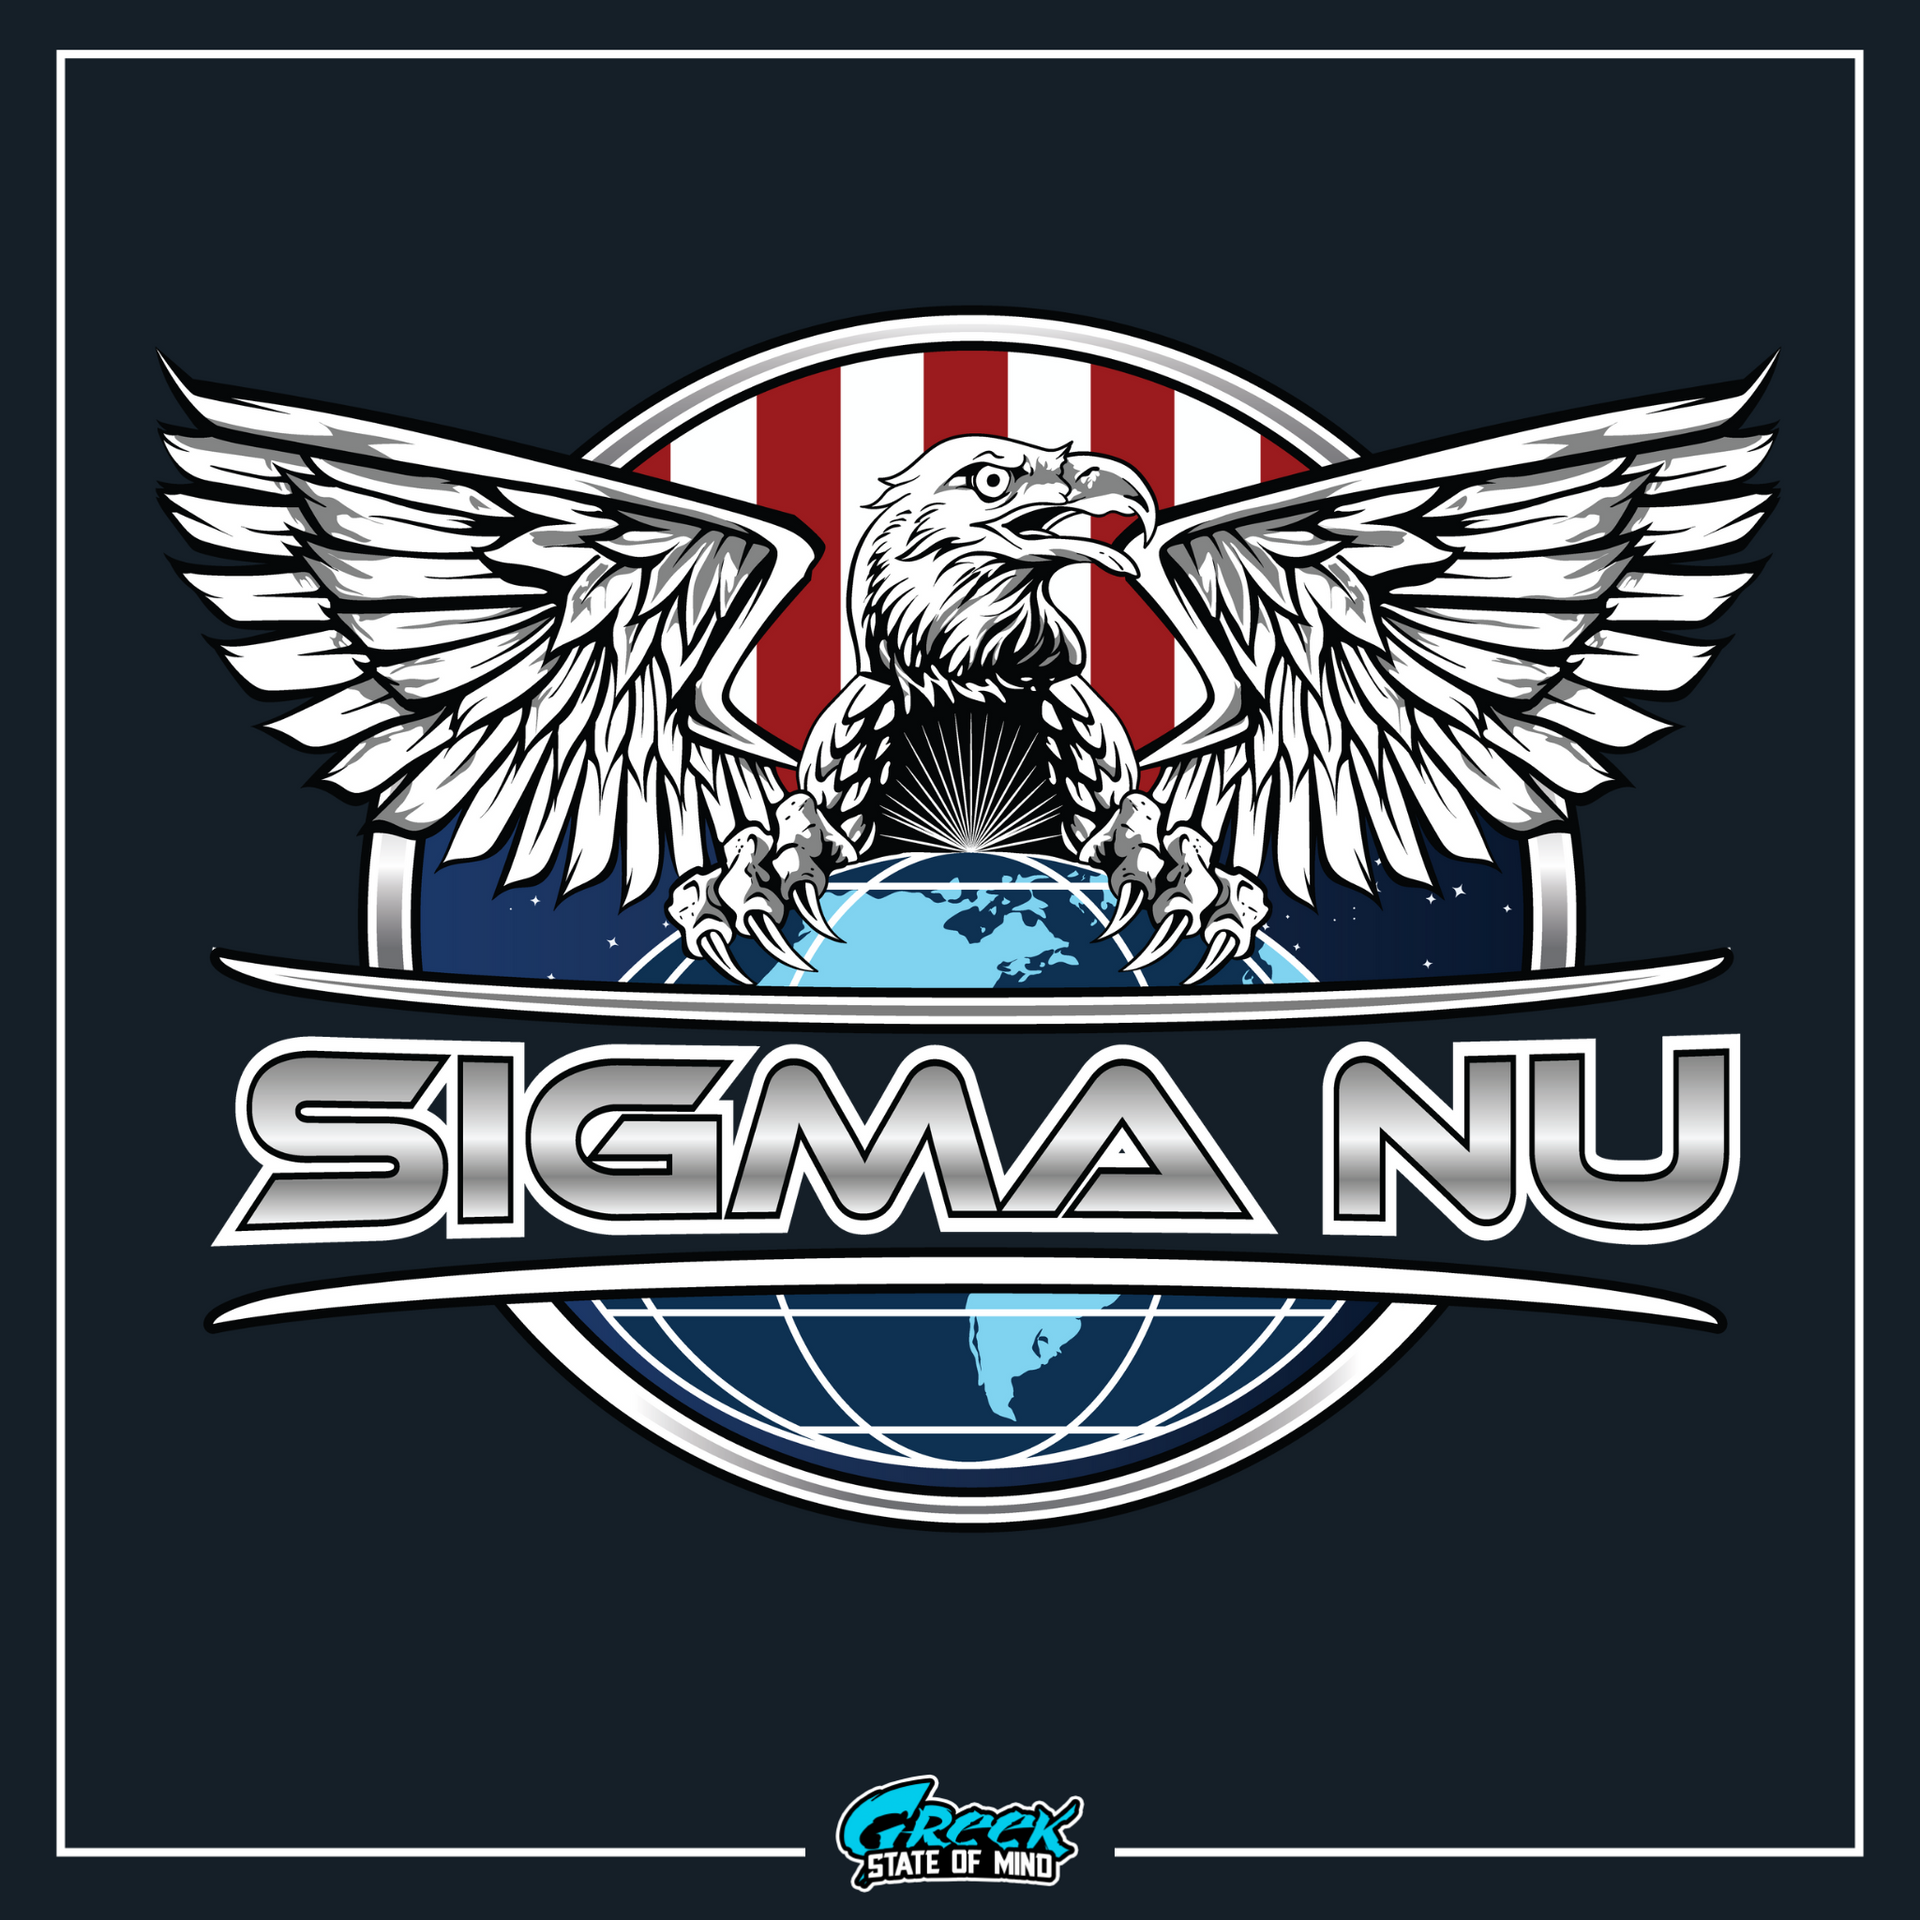 Sigma Nu Graphic T-Shirt | The Fraternal Order |Sigma Nu Clothing, Apparel and Merchandise design